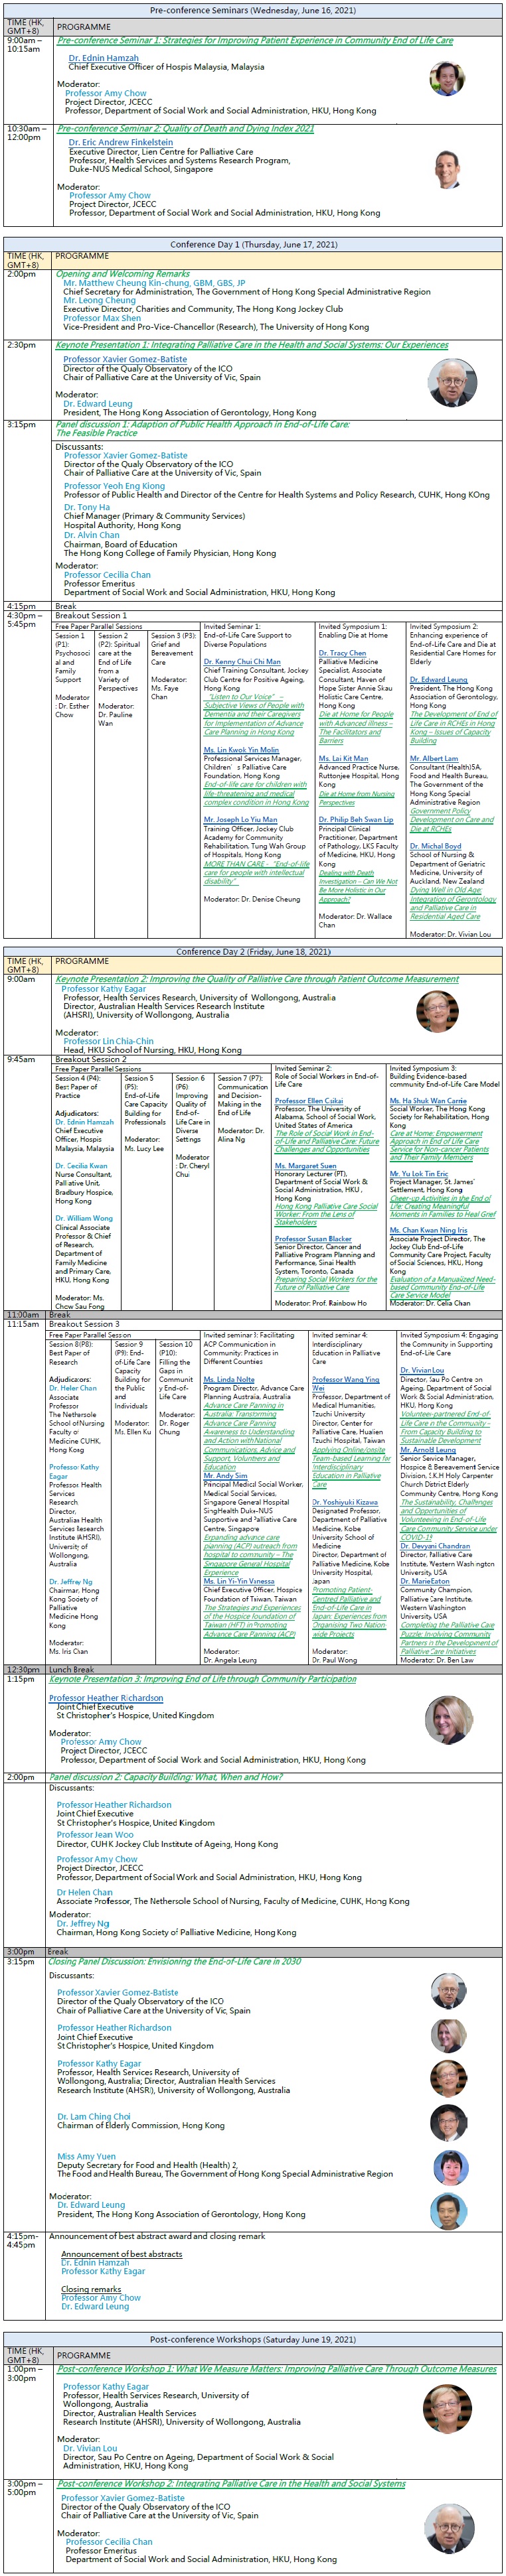 JCECC Conference 2021_Programme Rundown_horizontal_with moderator [For OC]-clean for website